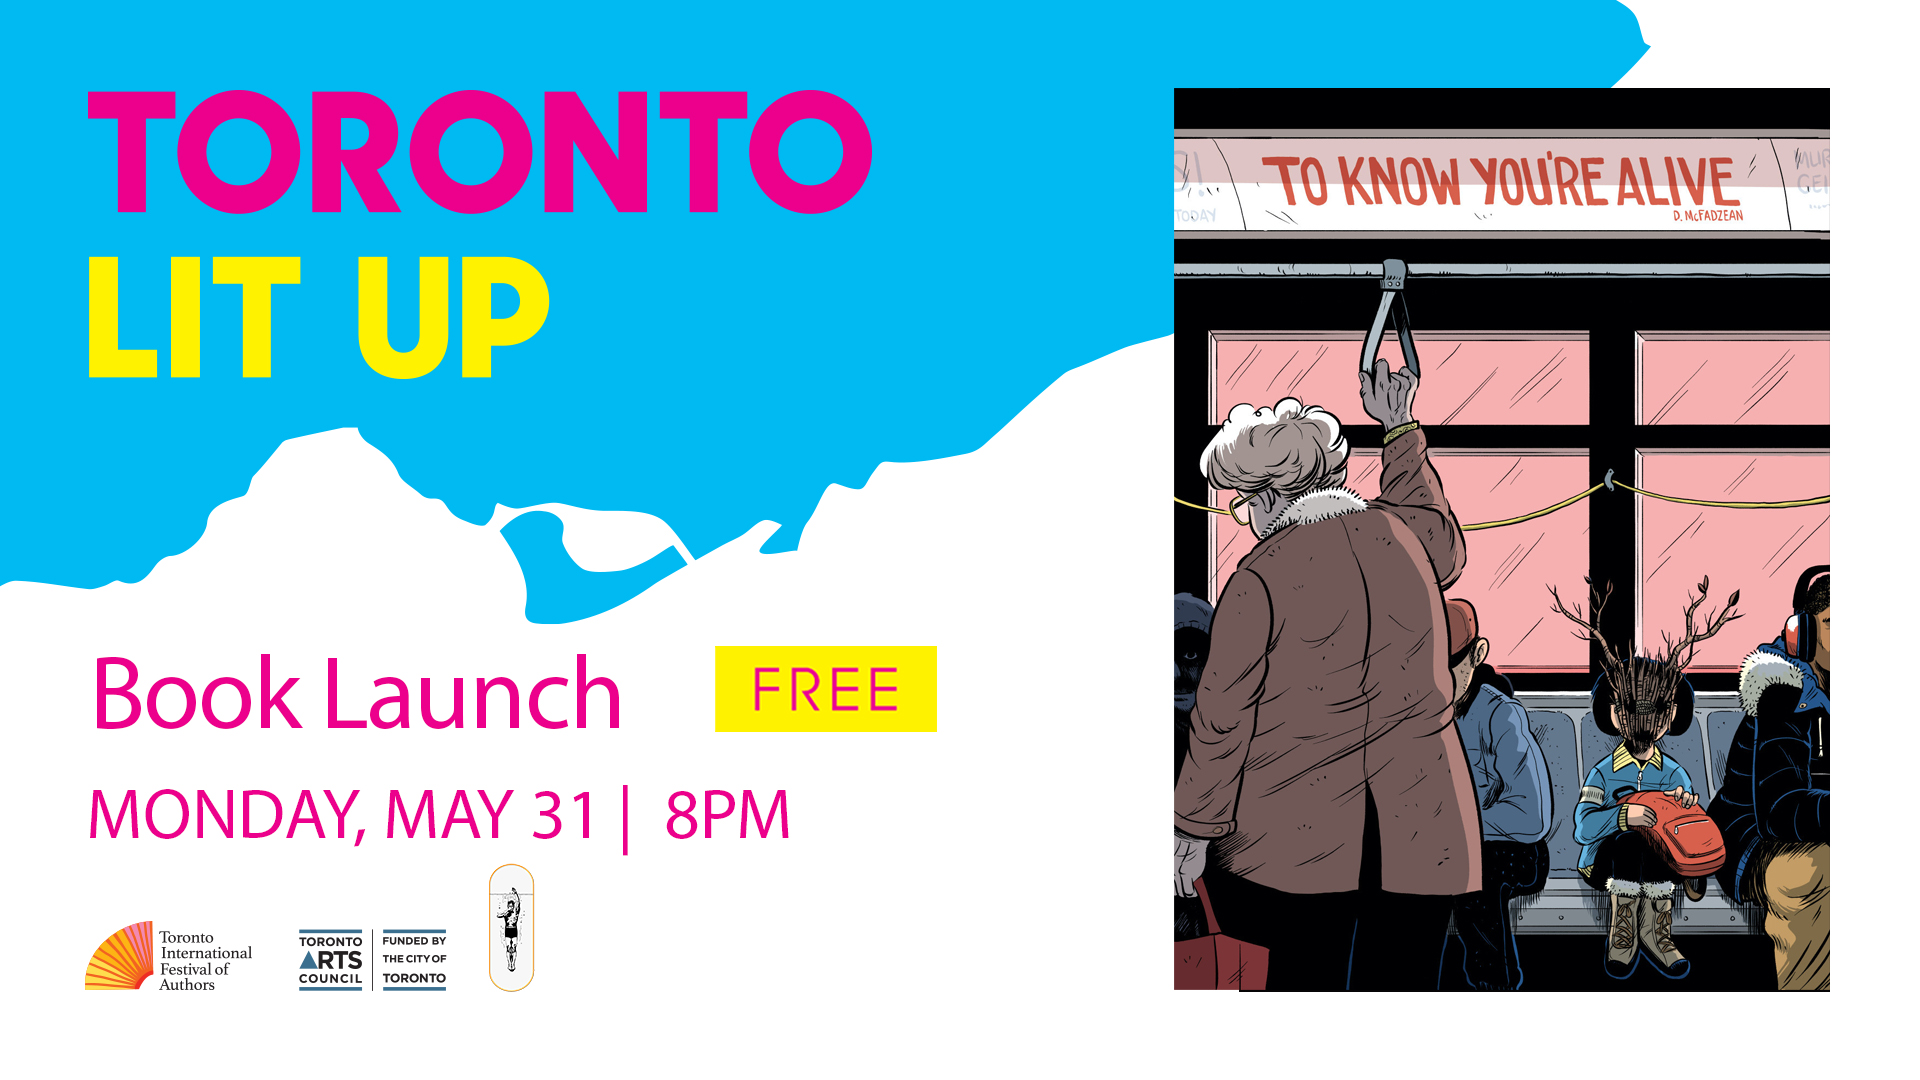 Dakota McFadzean Toronto Lit Up banner with the book cover of To Know You're Alive and "Book Launch Free Monday May 31 8pm". Includes TIFA, Toronto Arts Council and Conundrum Press logos